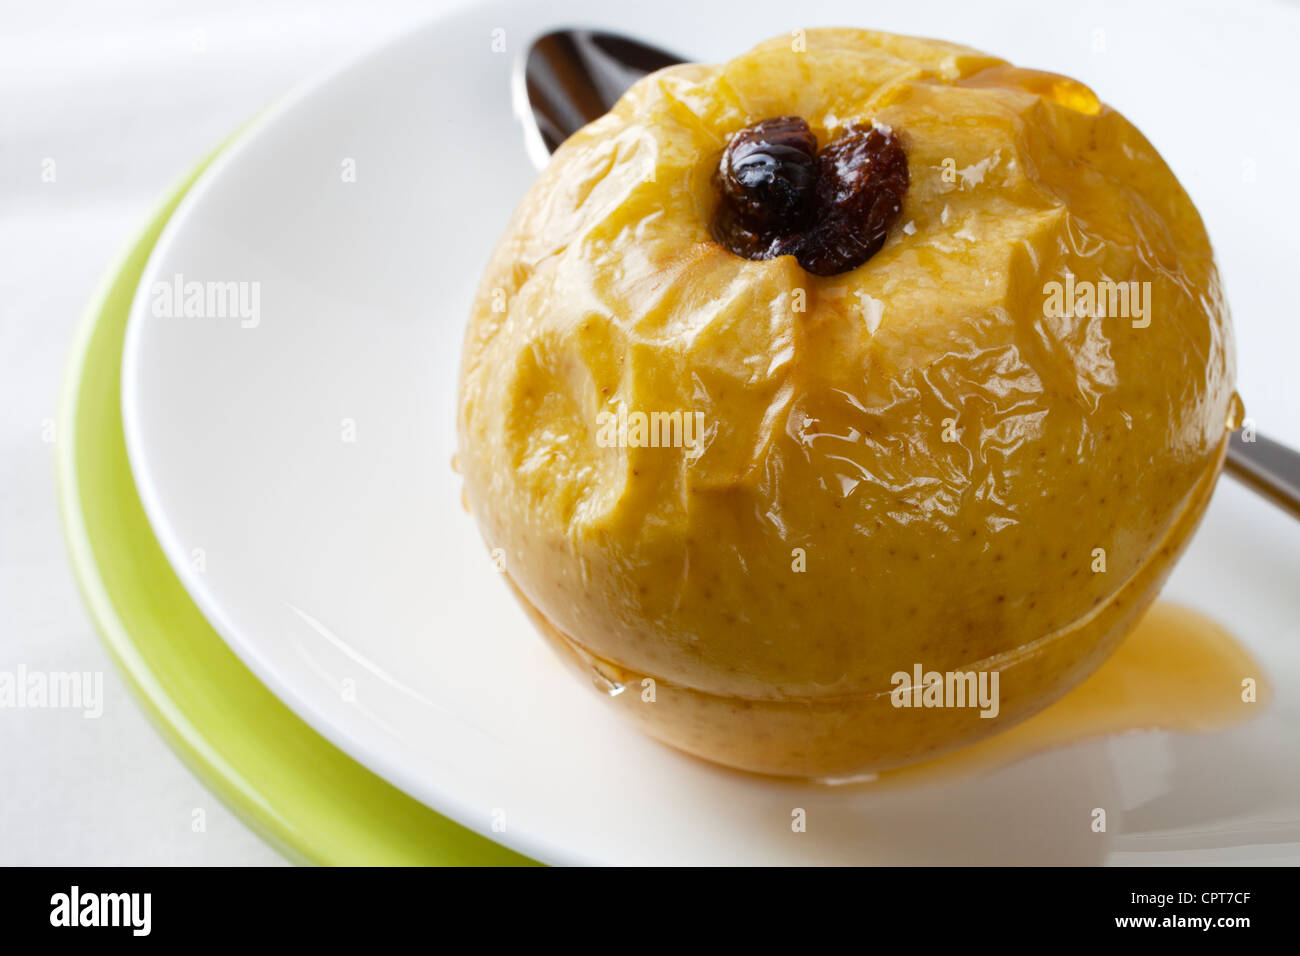 Apple, stuffed with raisins and baked with honey syrup. Stock Photo